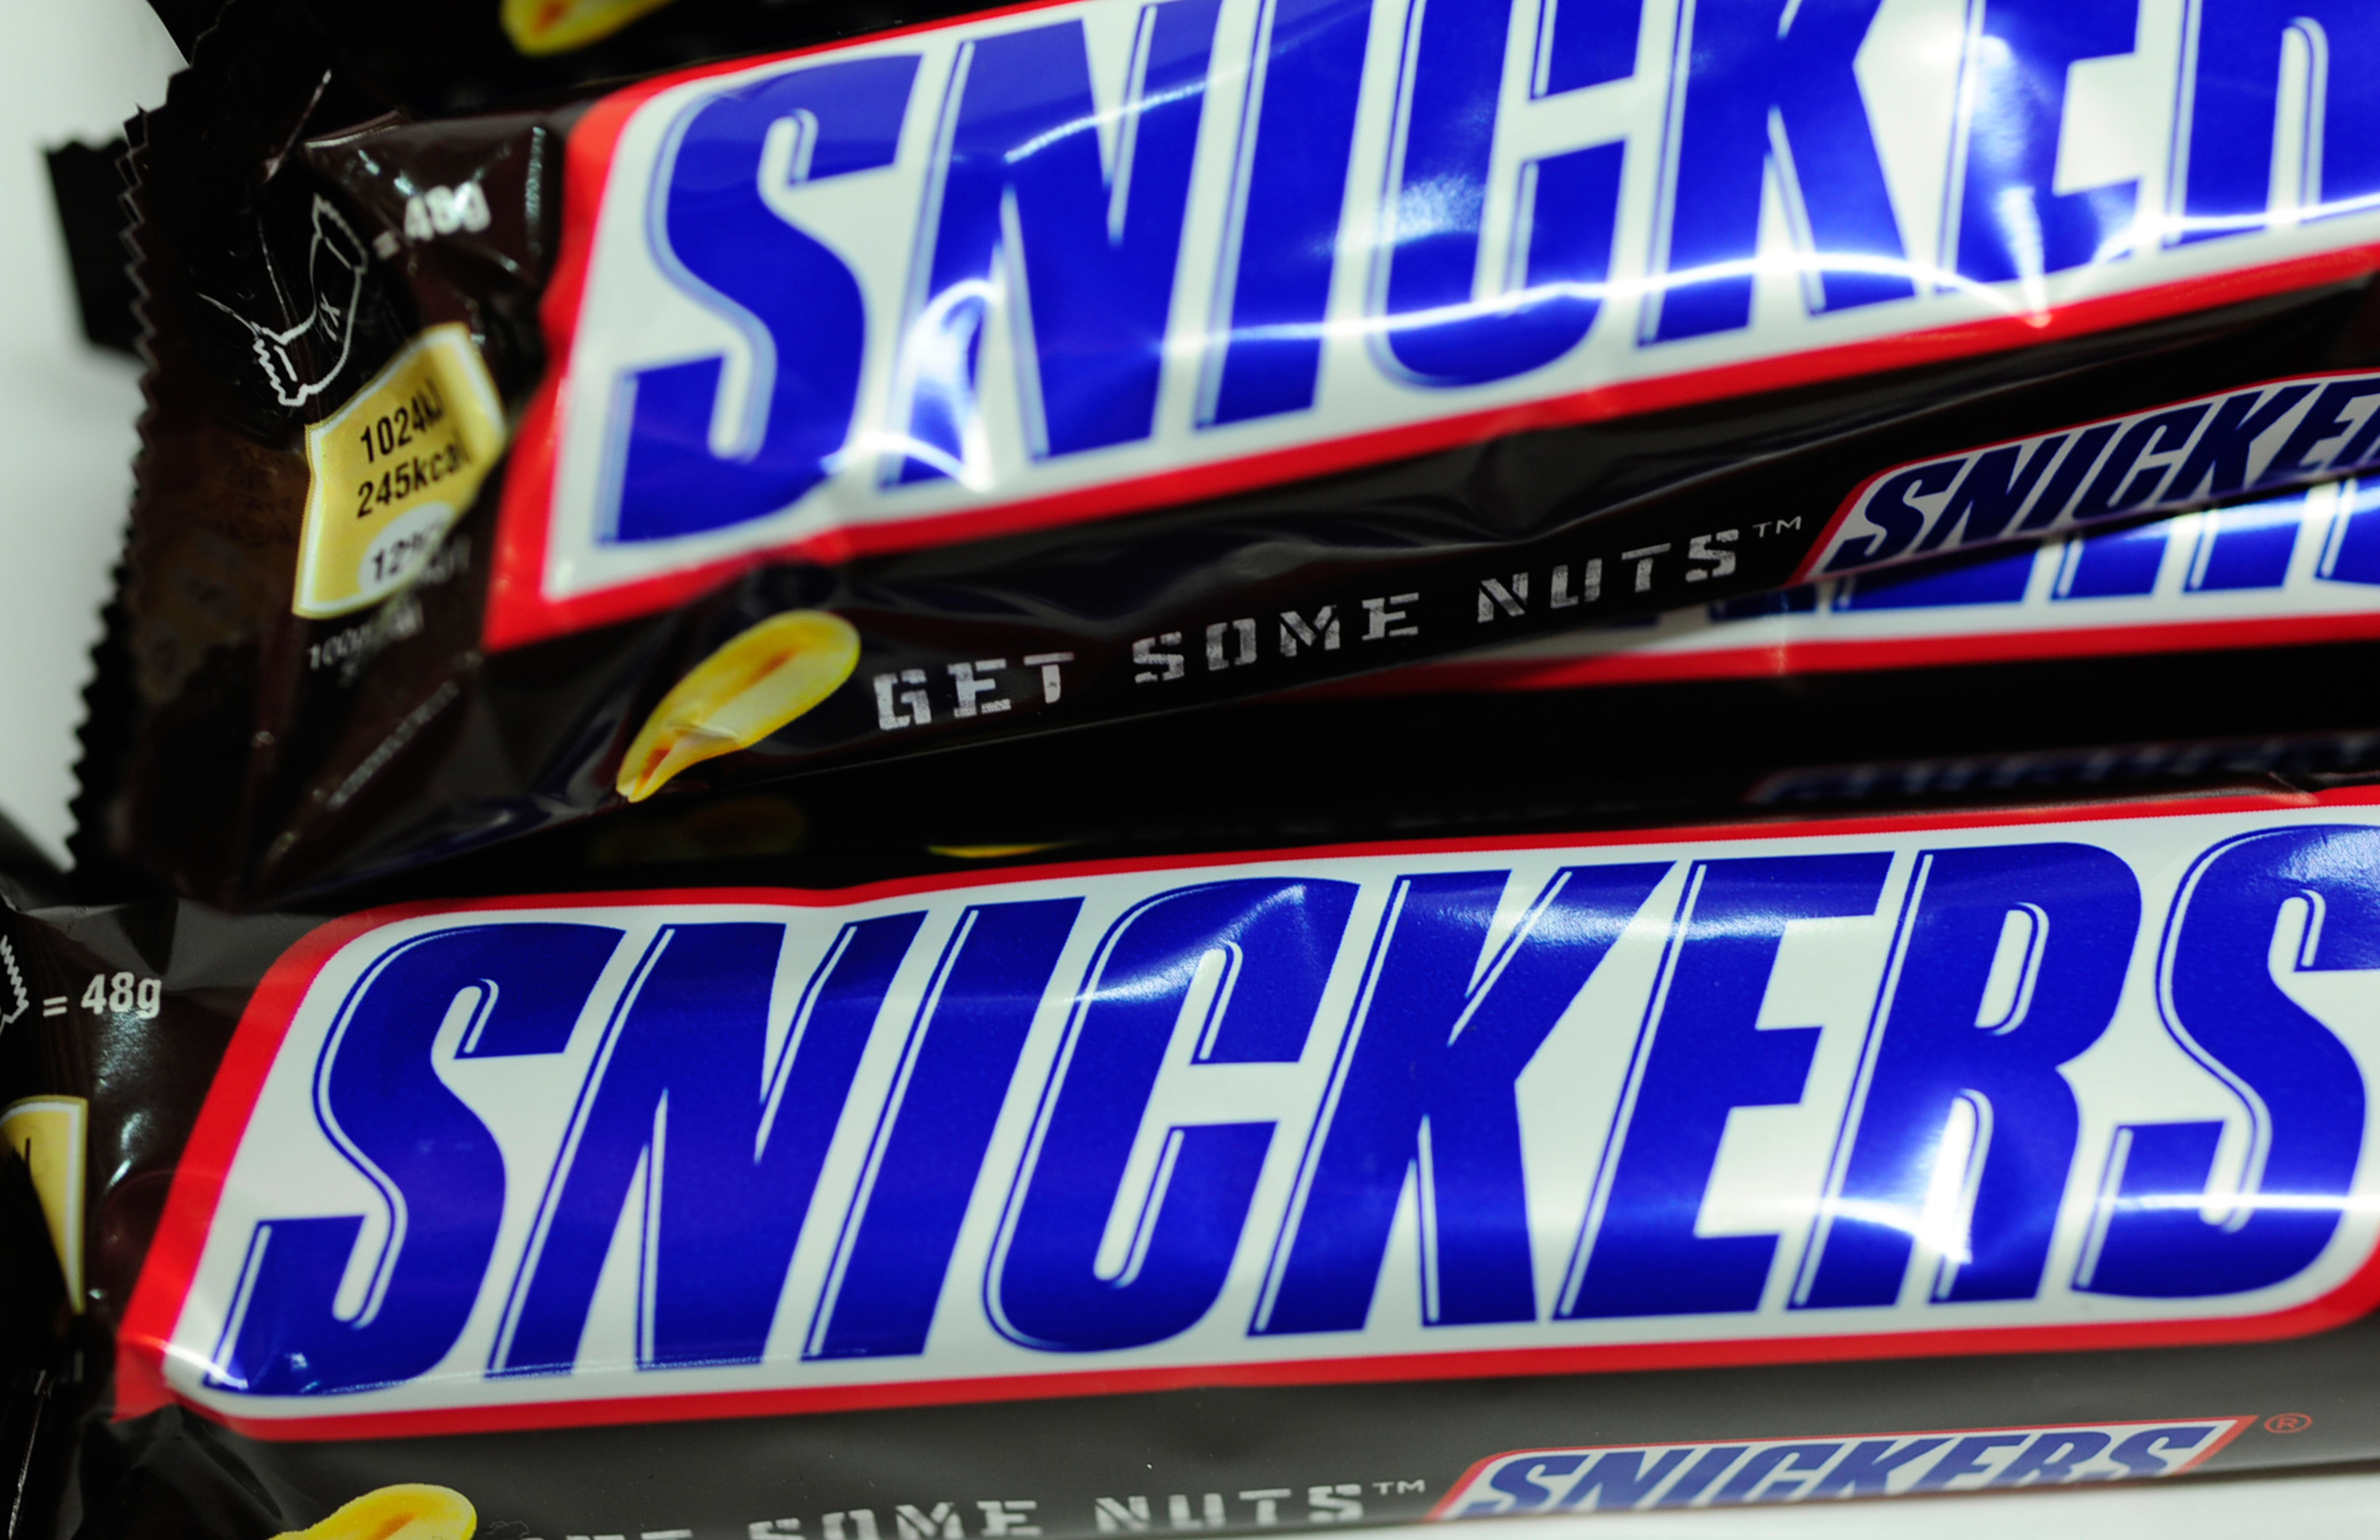 An up-close shot of multiple Snickers bars